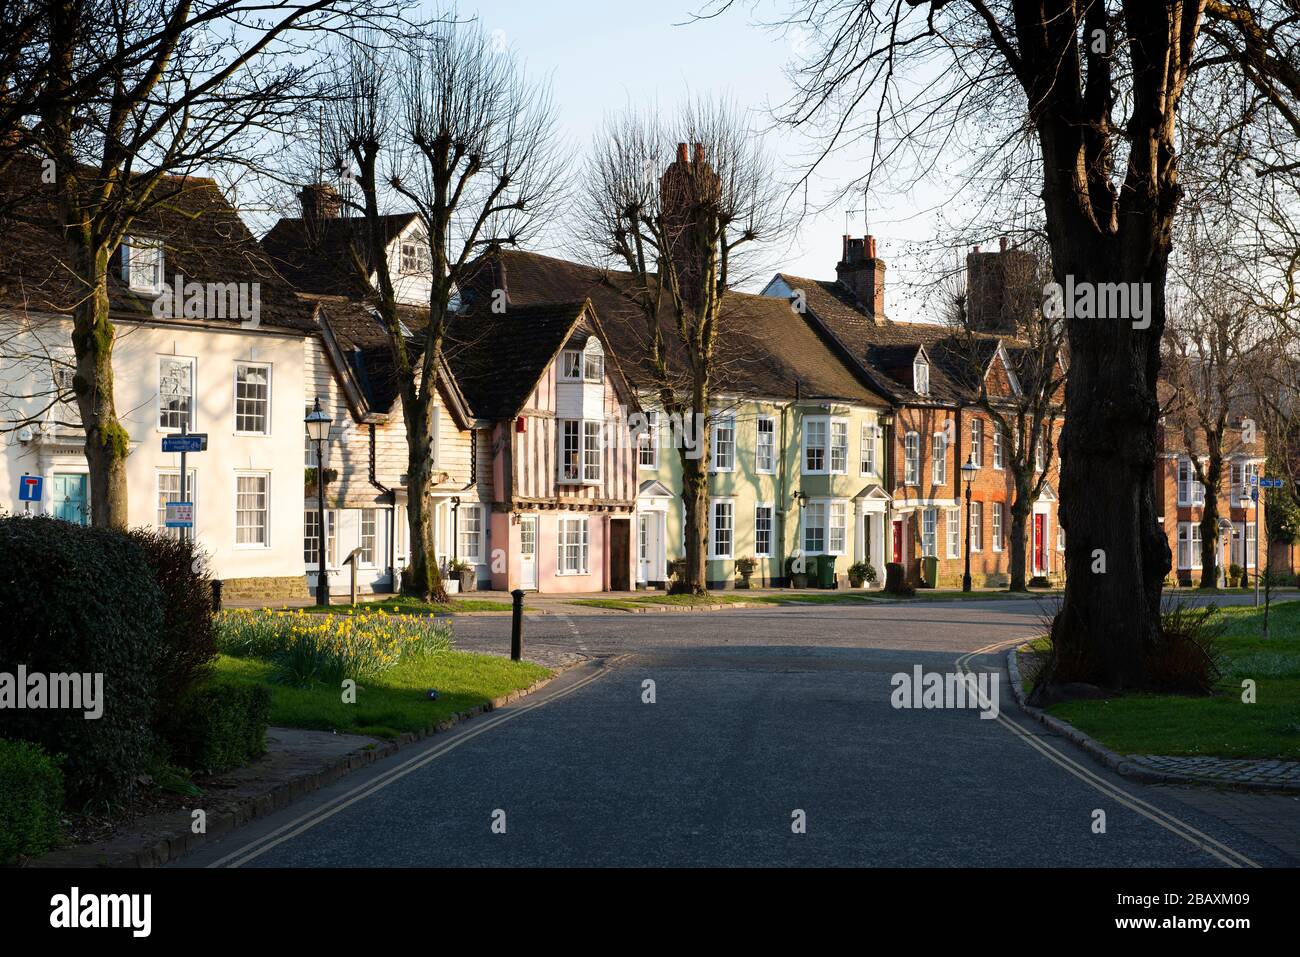 A view of the listed buildings from the 17th, 18th and 19th centuries on the eastern side of the Causeway, Horsham, West Sussex Stock Photo